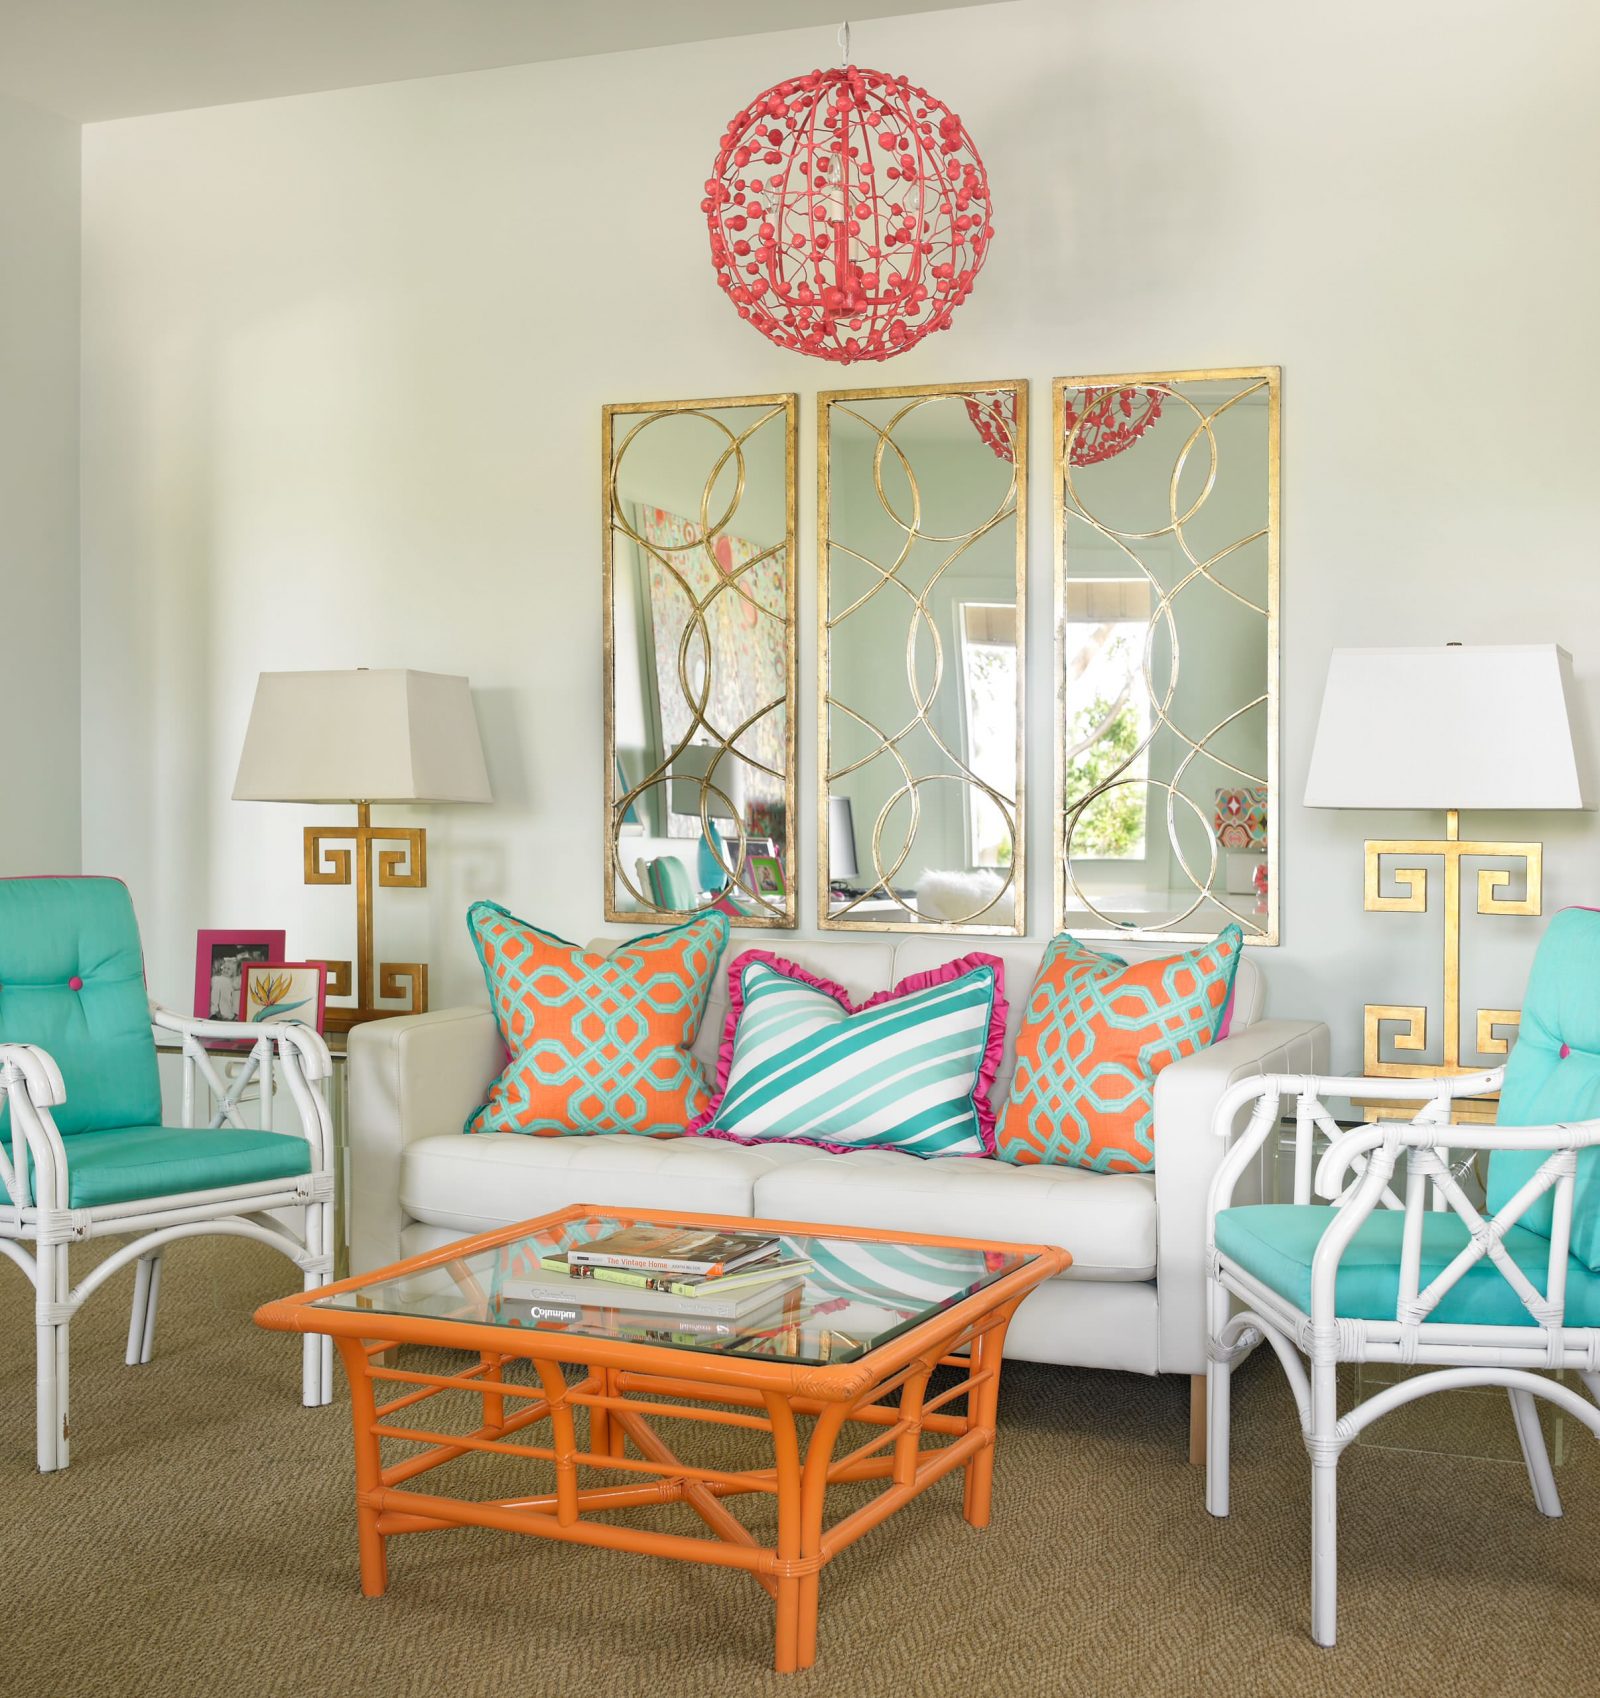 Unique What Colors Go With Turquoise for Large Space